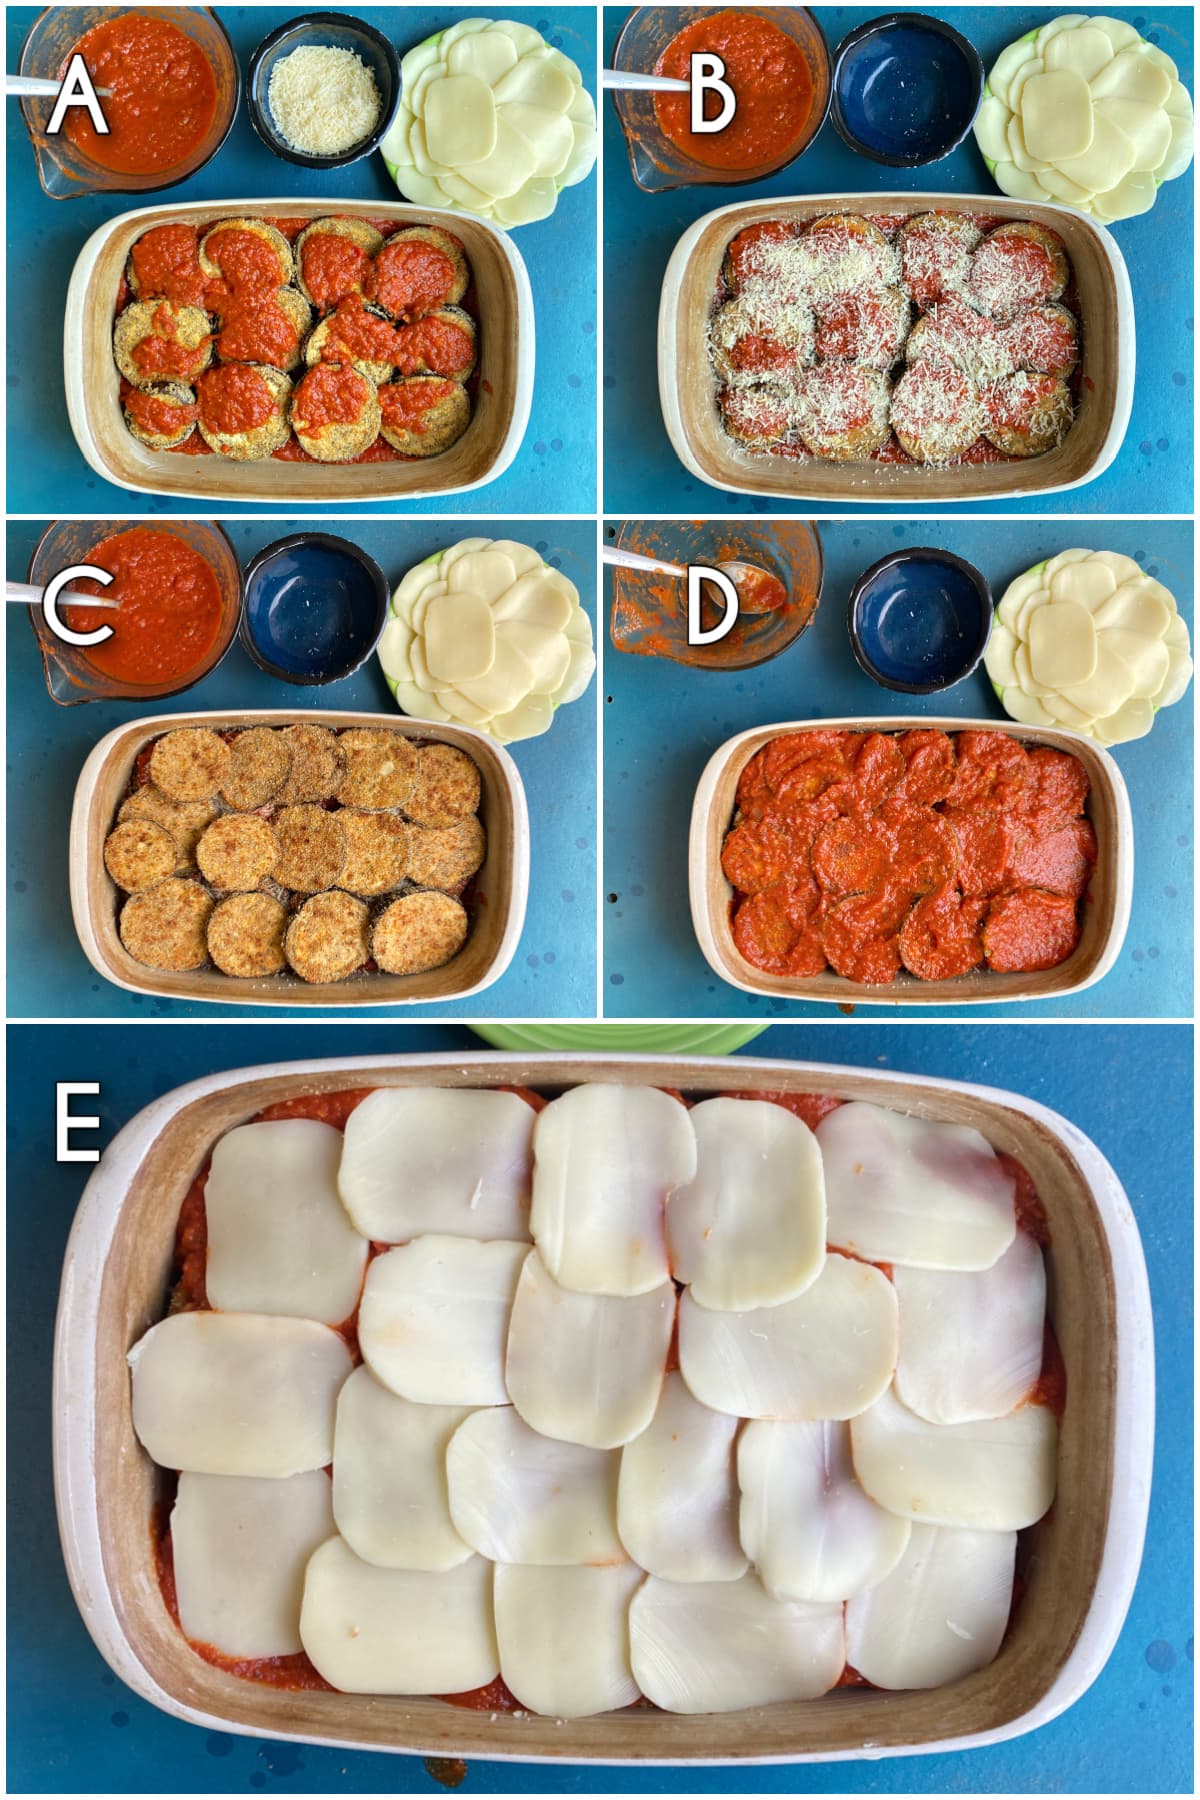 5-panel collage depicting overhead shots of layering of eggplant parmesan, as described in recipe instructions.